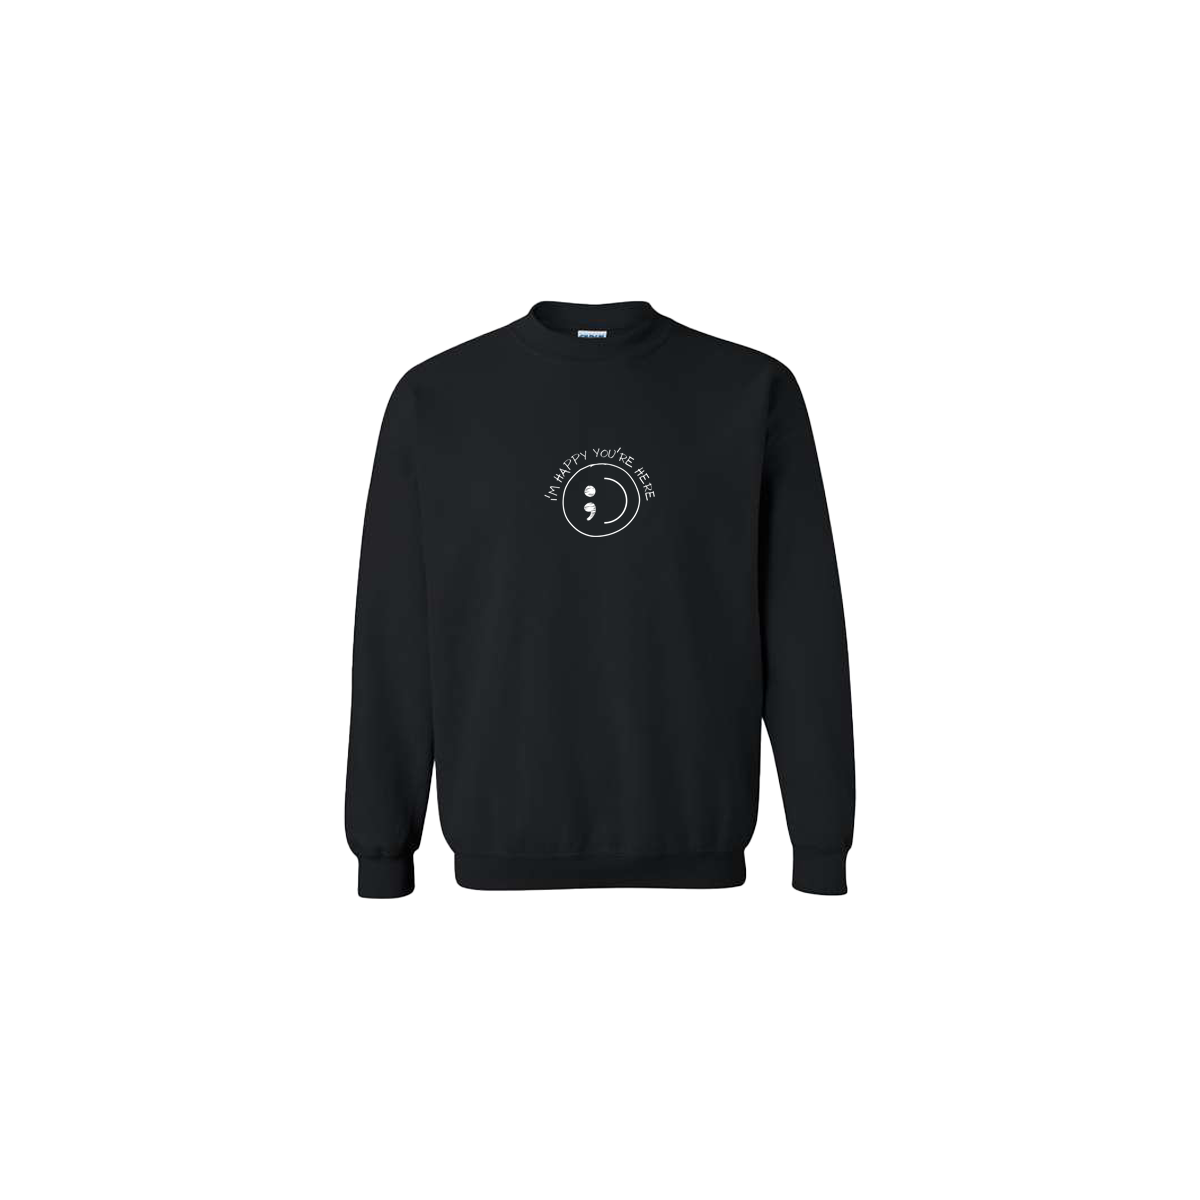 I'm Happy You're Here Embroidered Black Crewneck - Mental Health Awareness Clothing